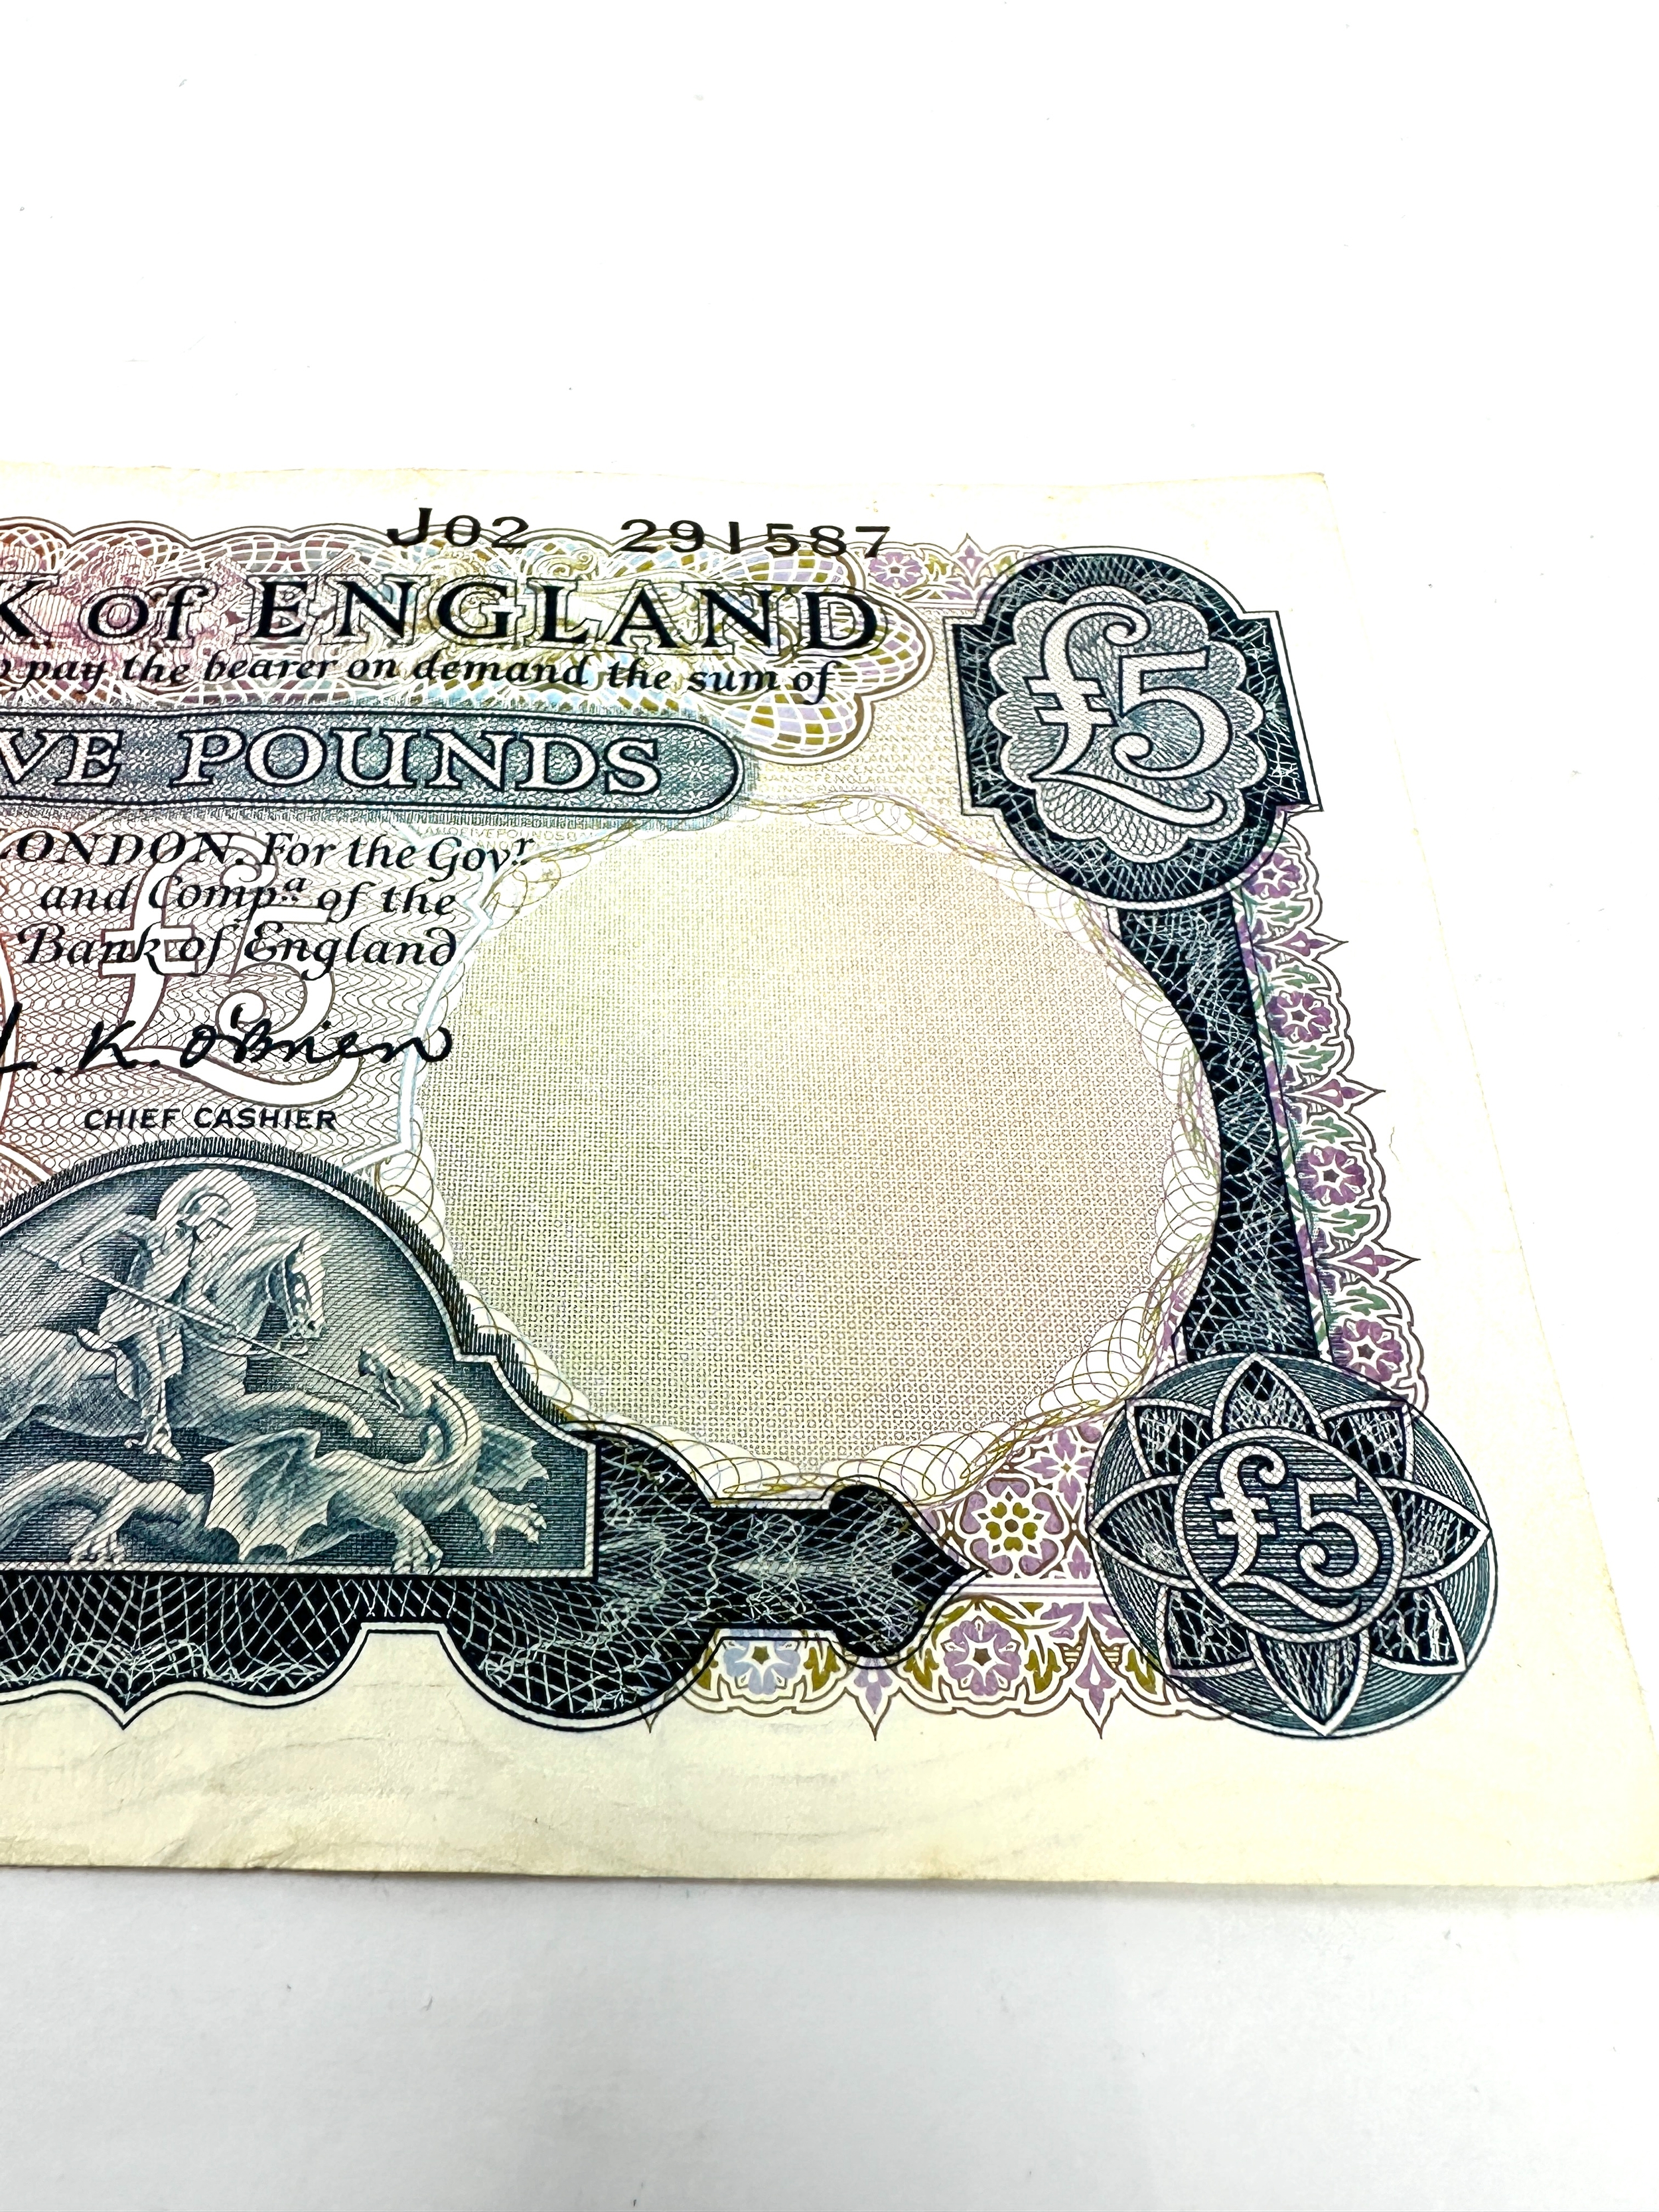 Bank of England L K O'BRIEN £5 Five Pounds Banknote good grade note - Image 3 of 4